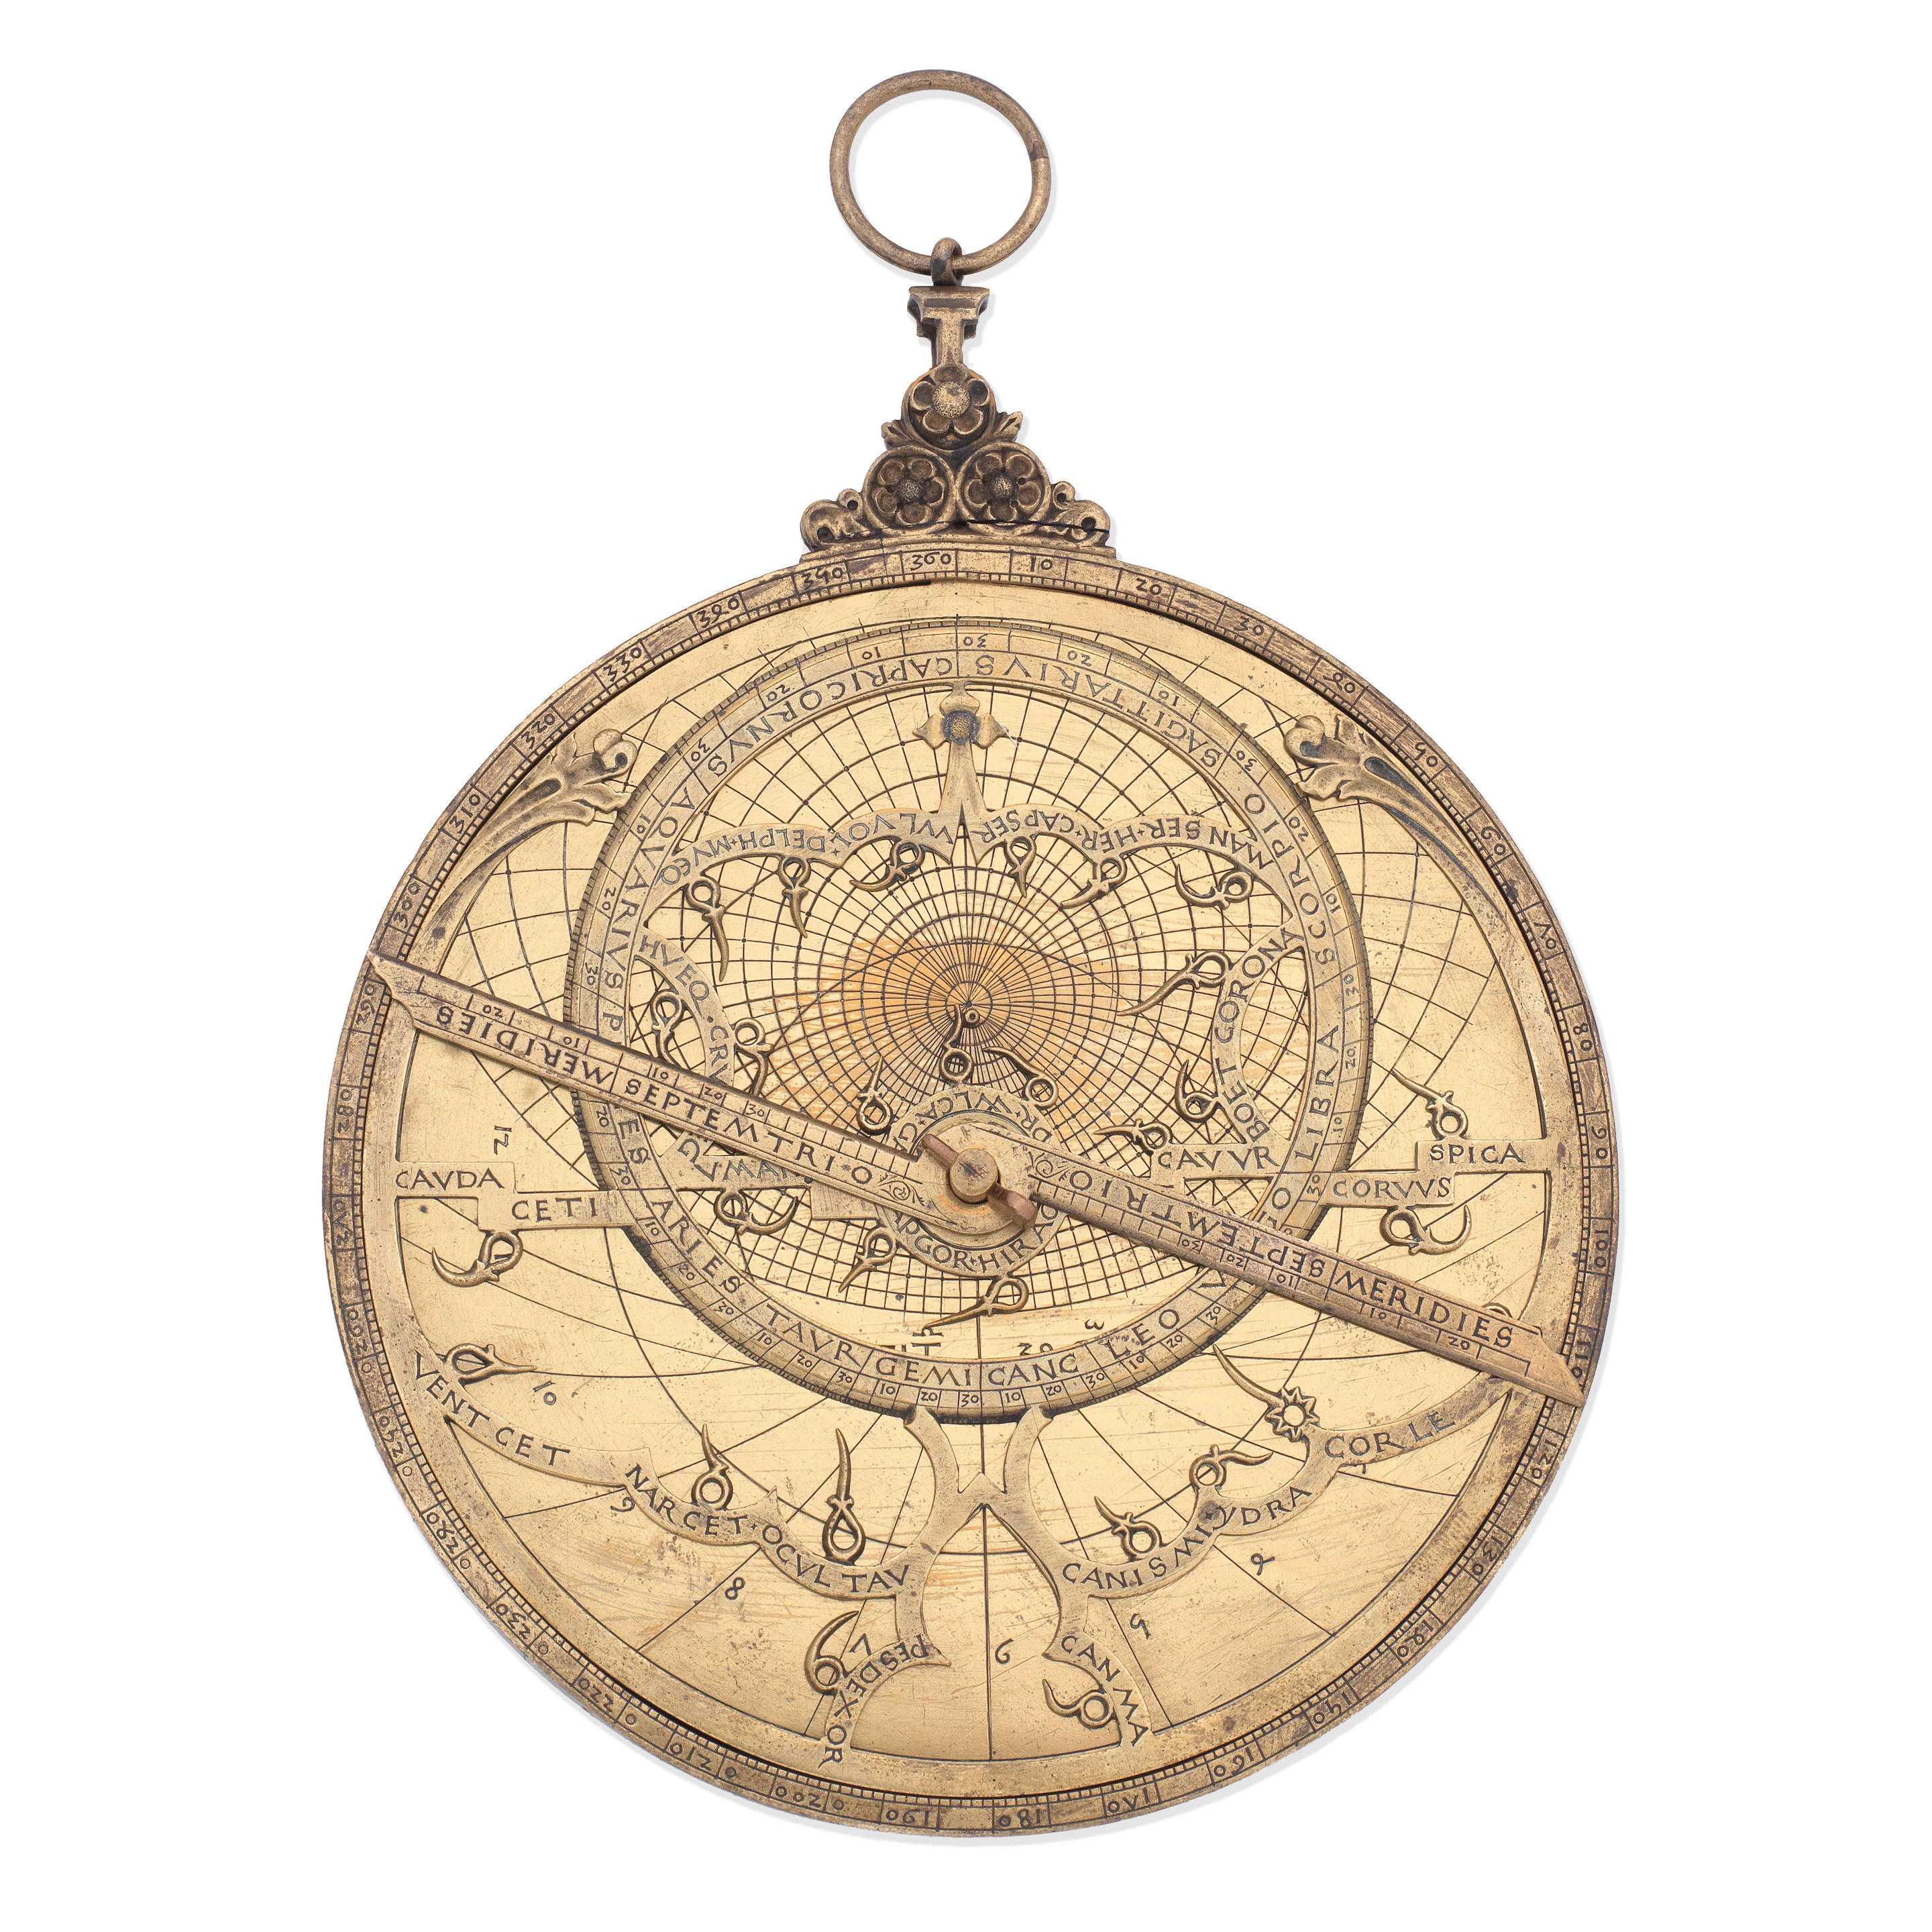 15th-century astrolabe, which sold for £400,000 ($638,645 with buyer's premium) at Bonhams.